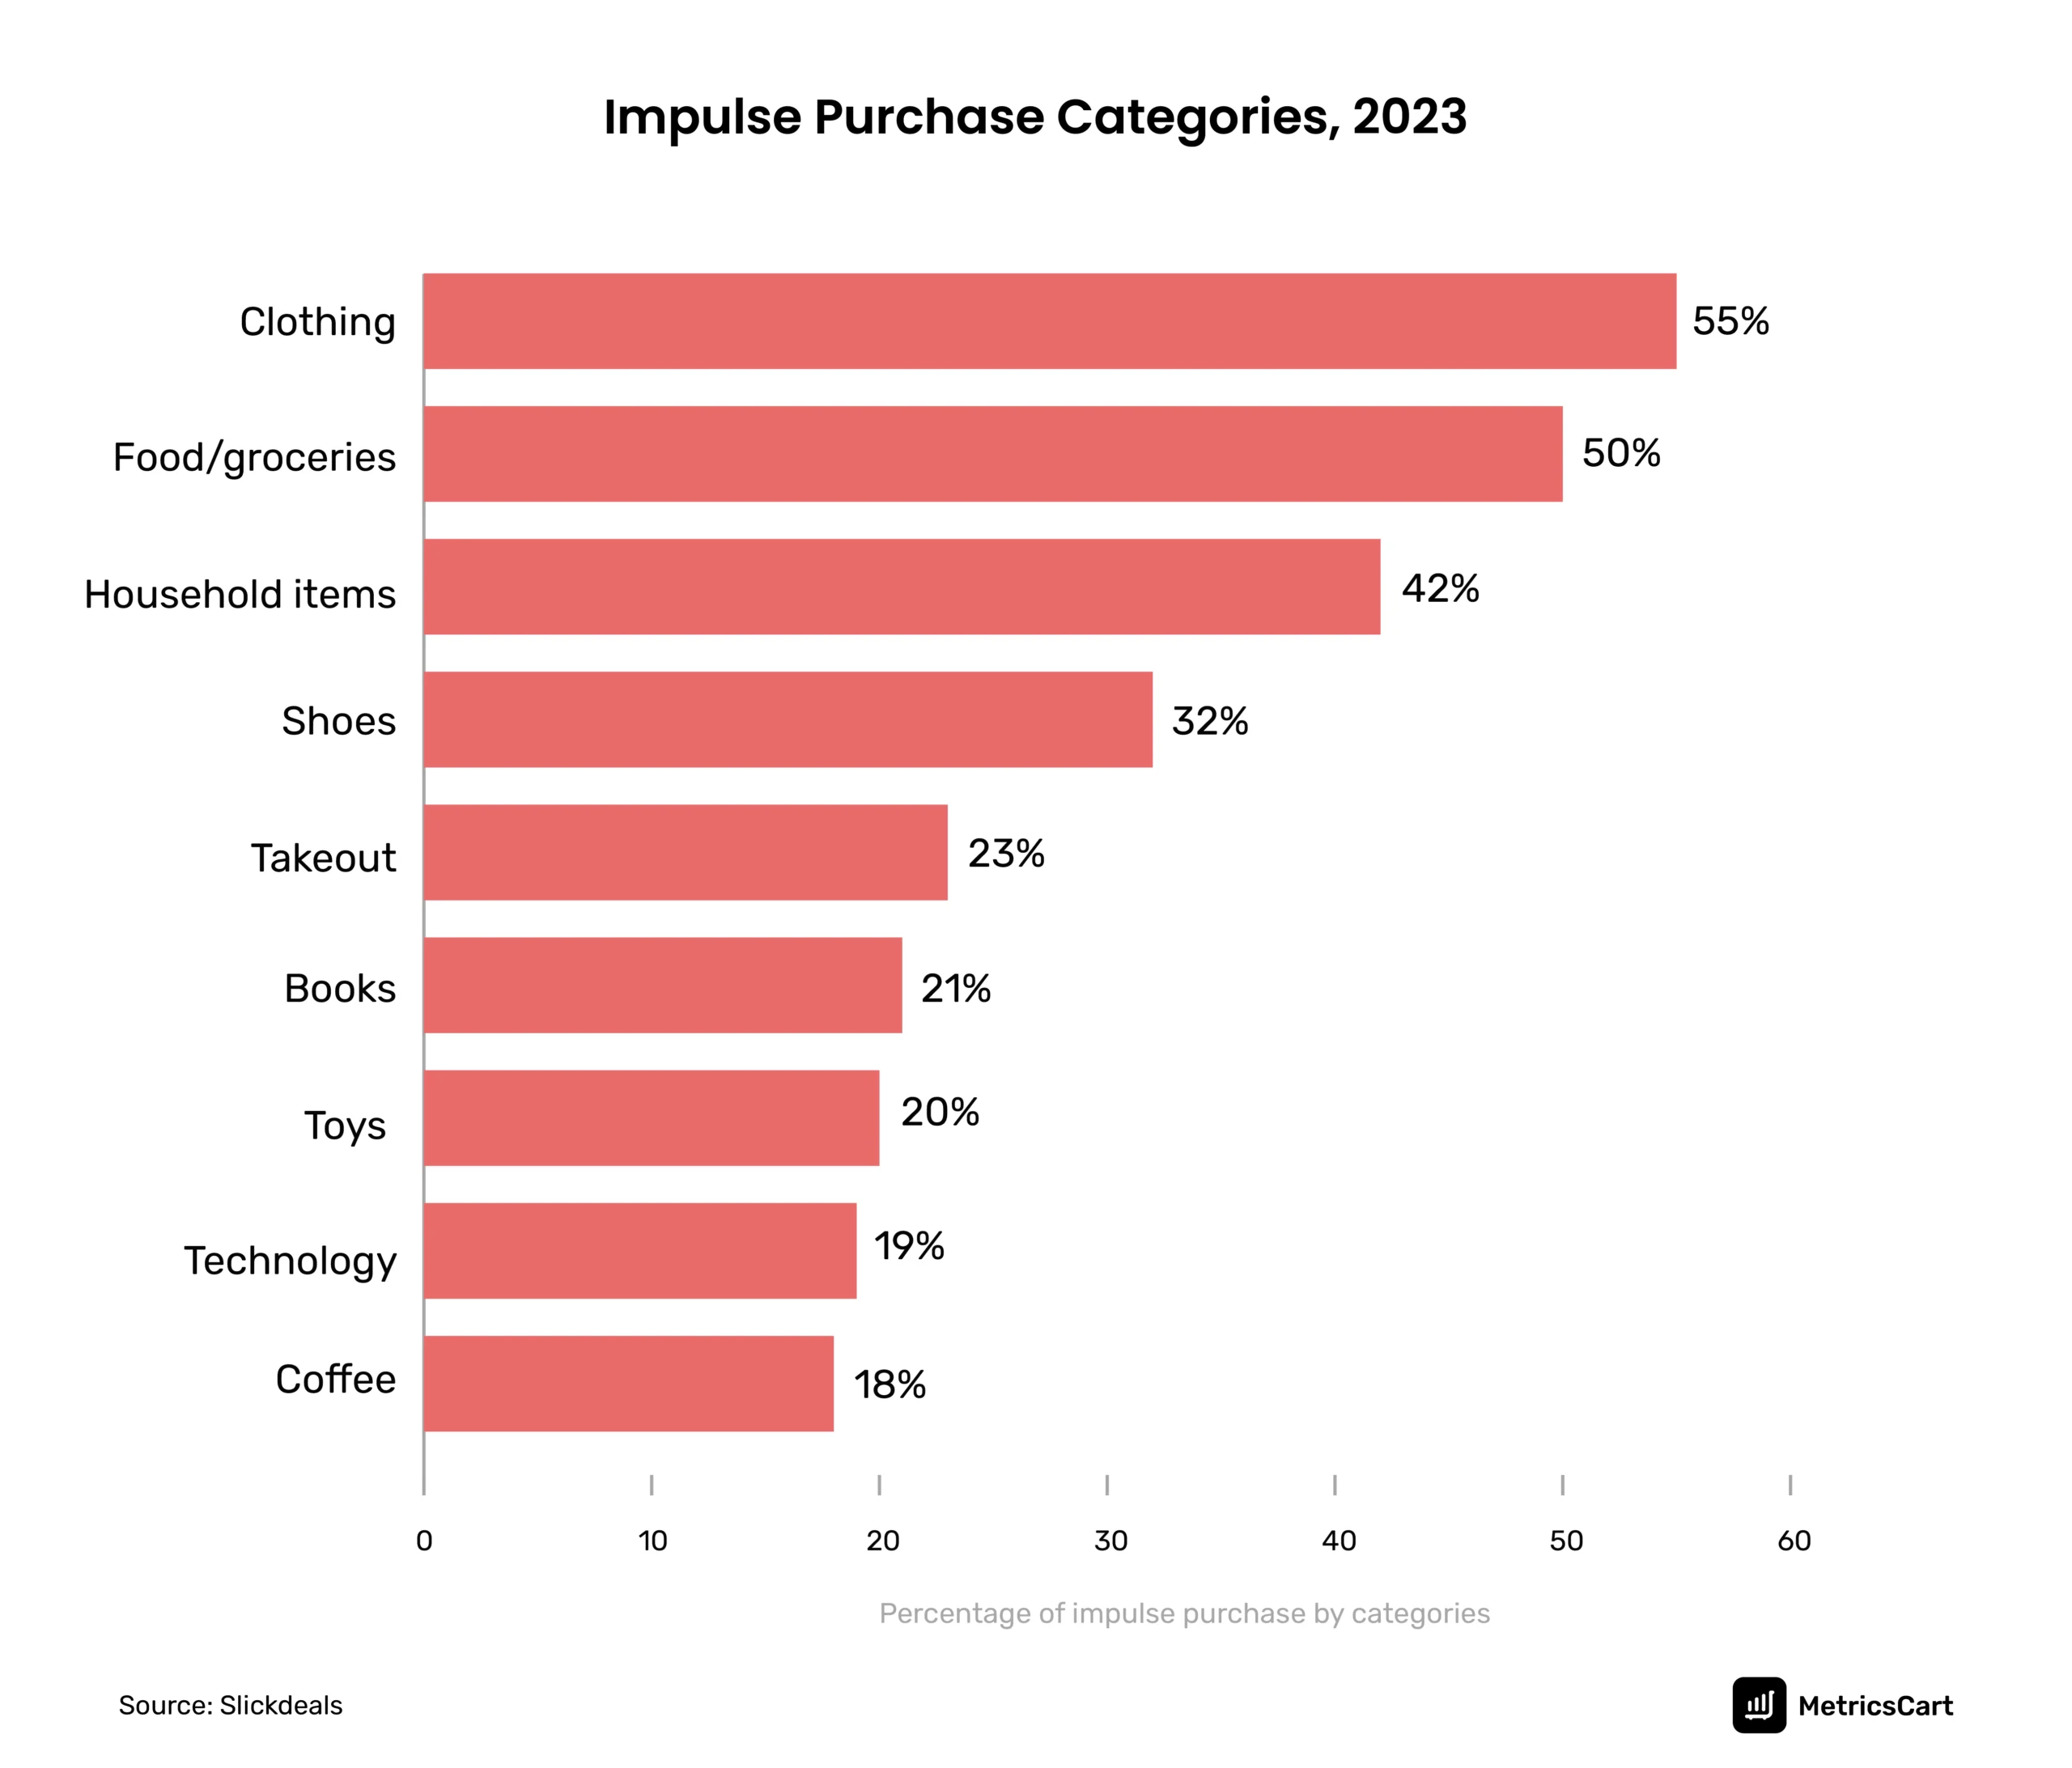 A chart showing impulse purchase in different categories of products for the year 2023.